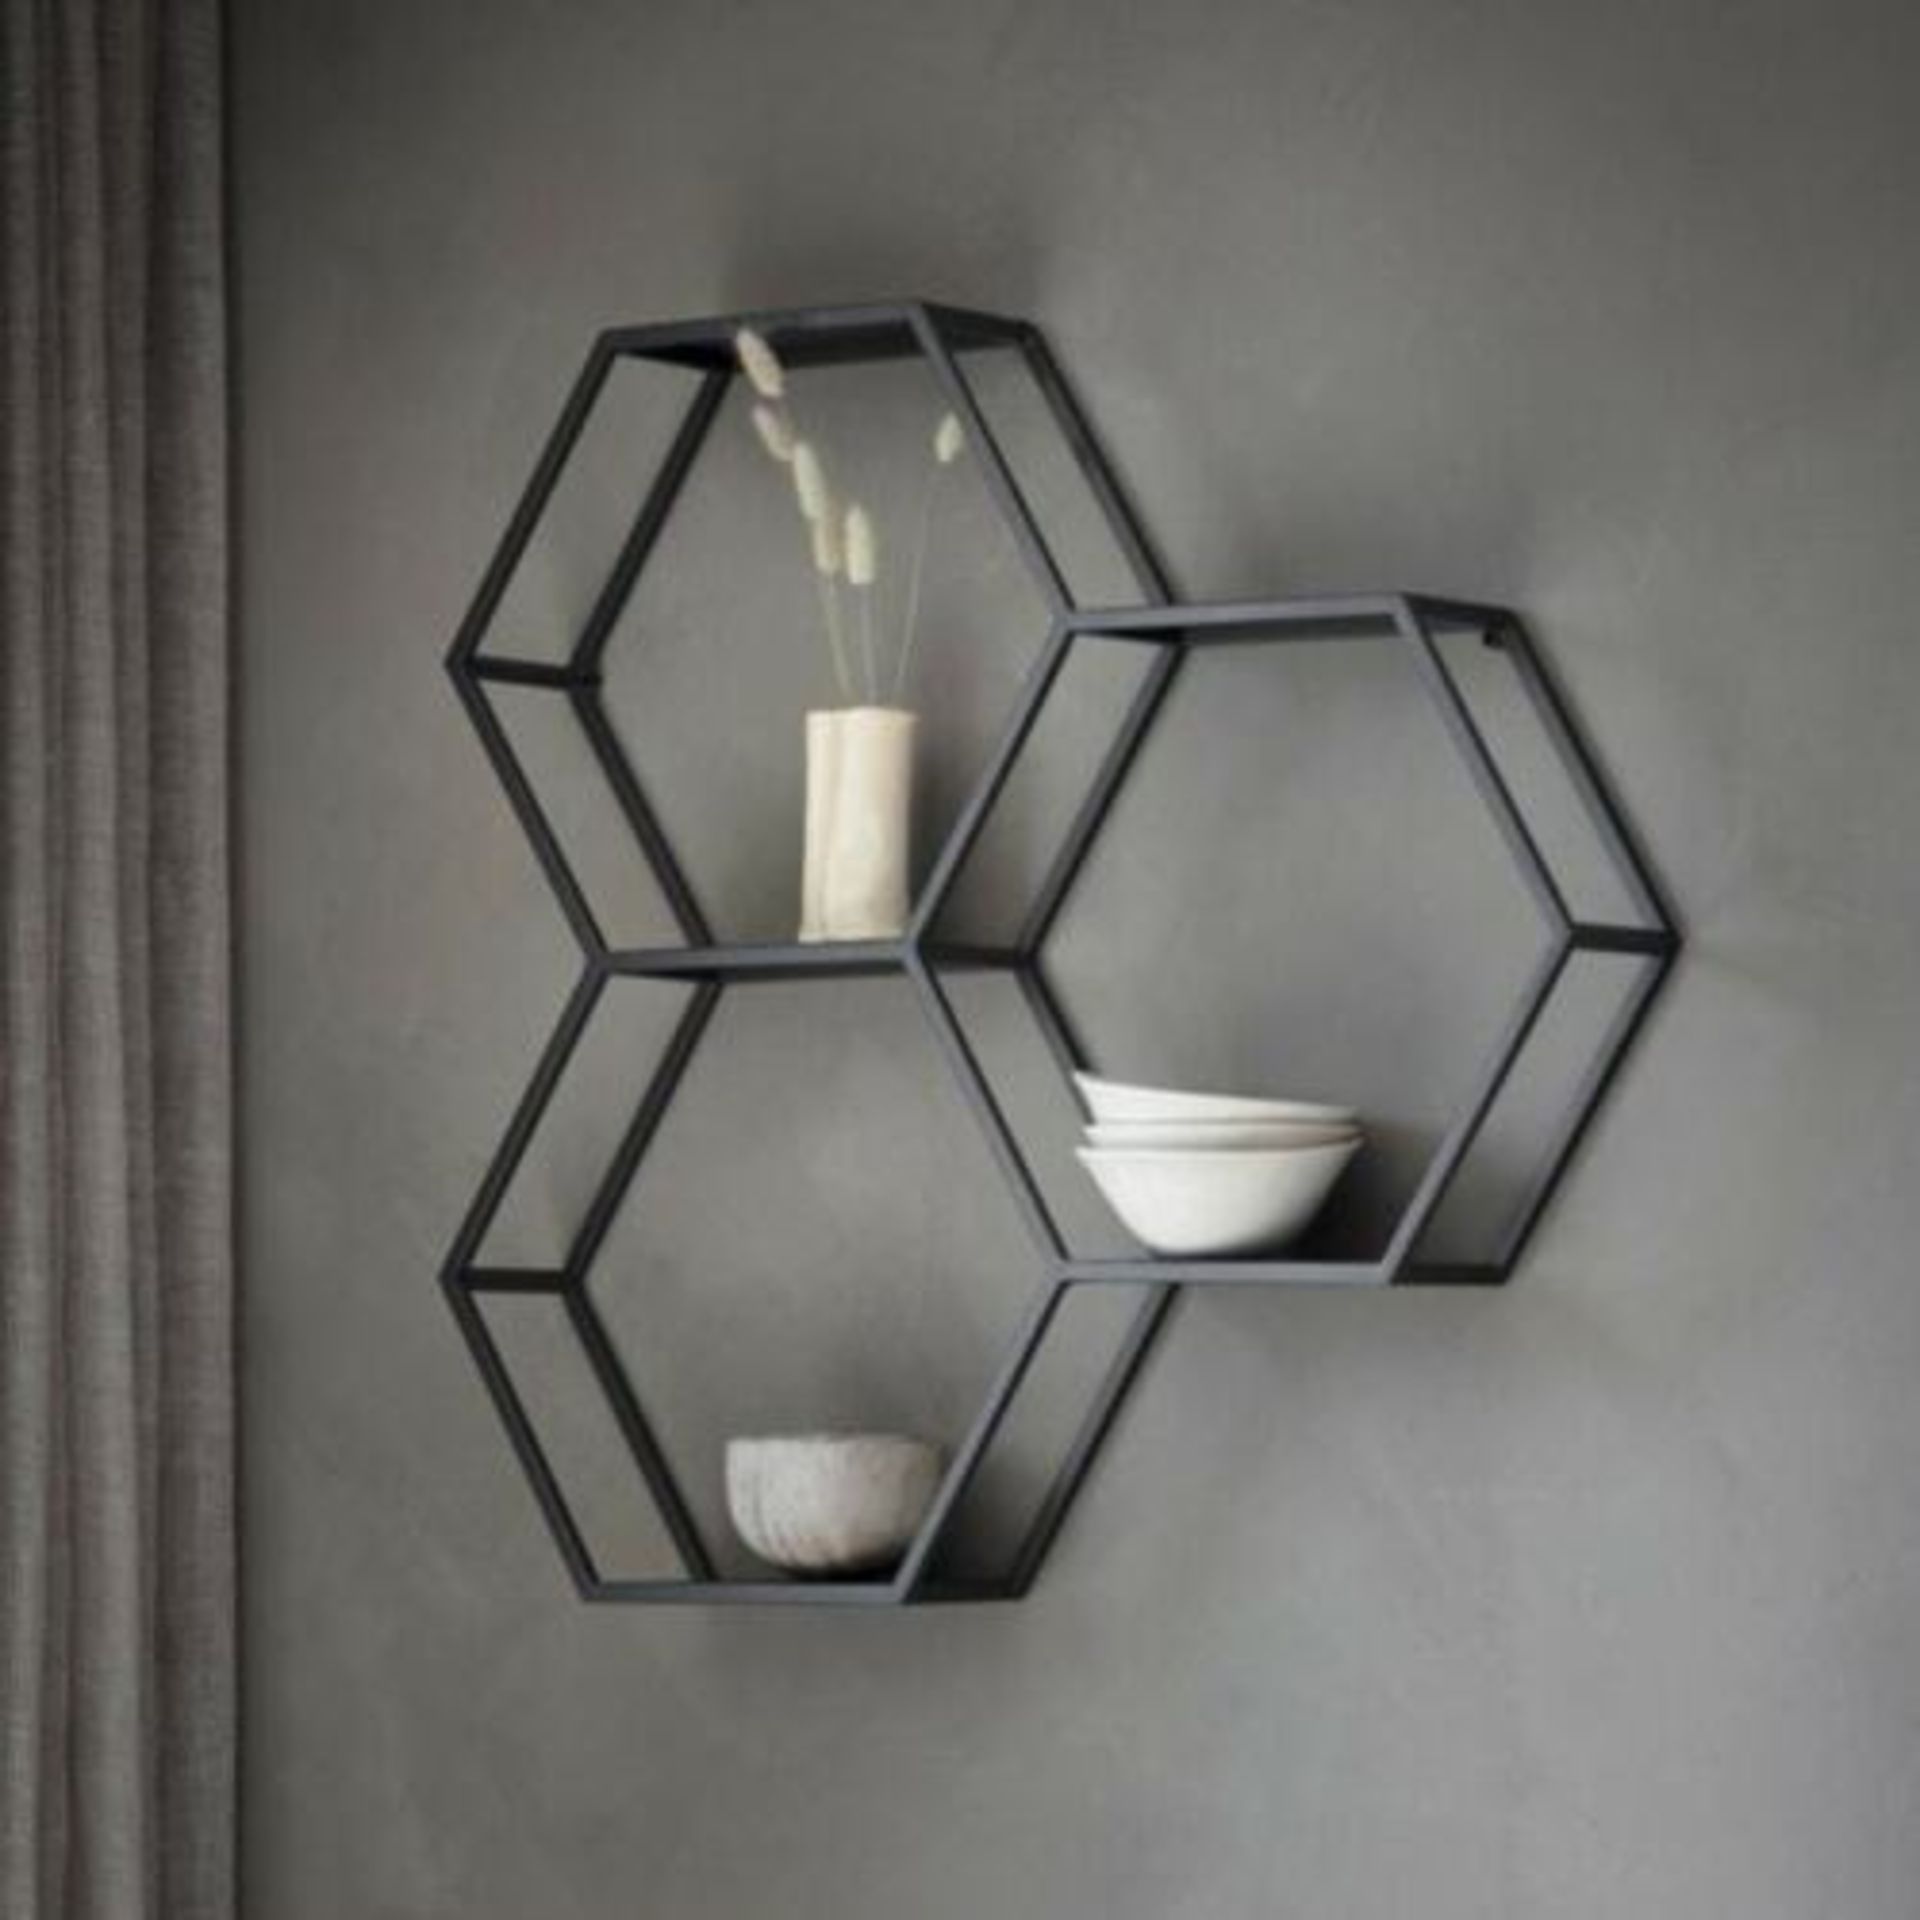 Hudson Gallery Heston Metal Hexagon Wall Mounted Storage Unit Shelf in Black - Brand New and Boxed - Image 2 of 3